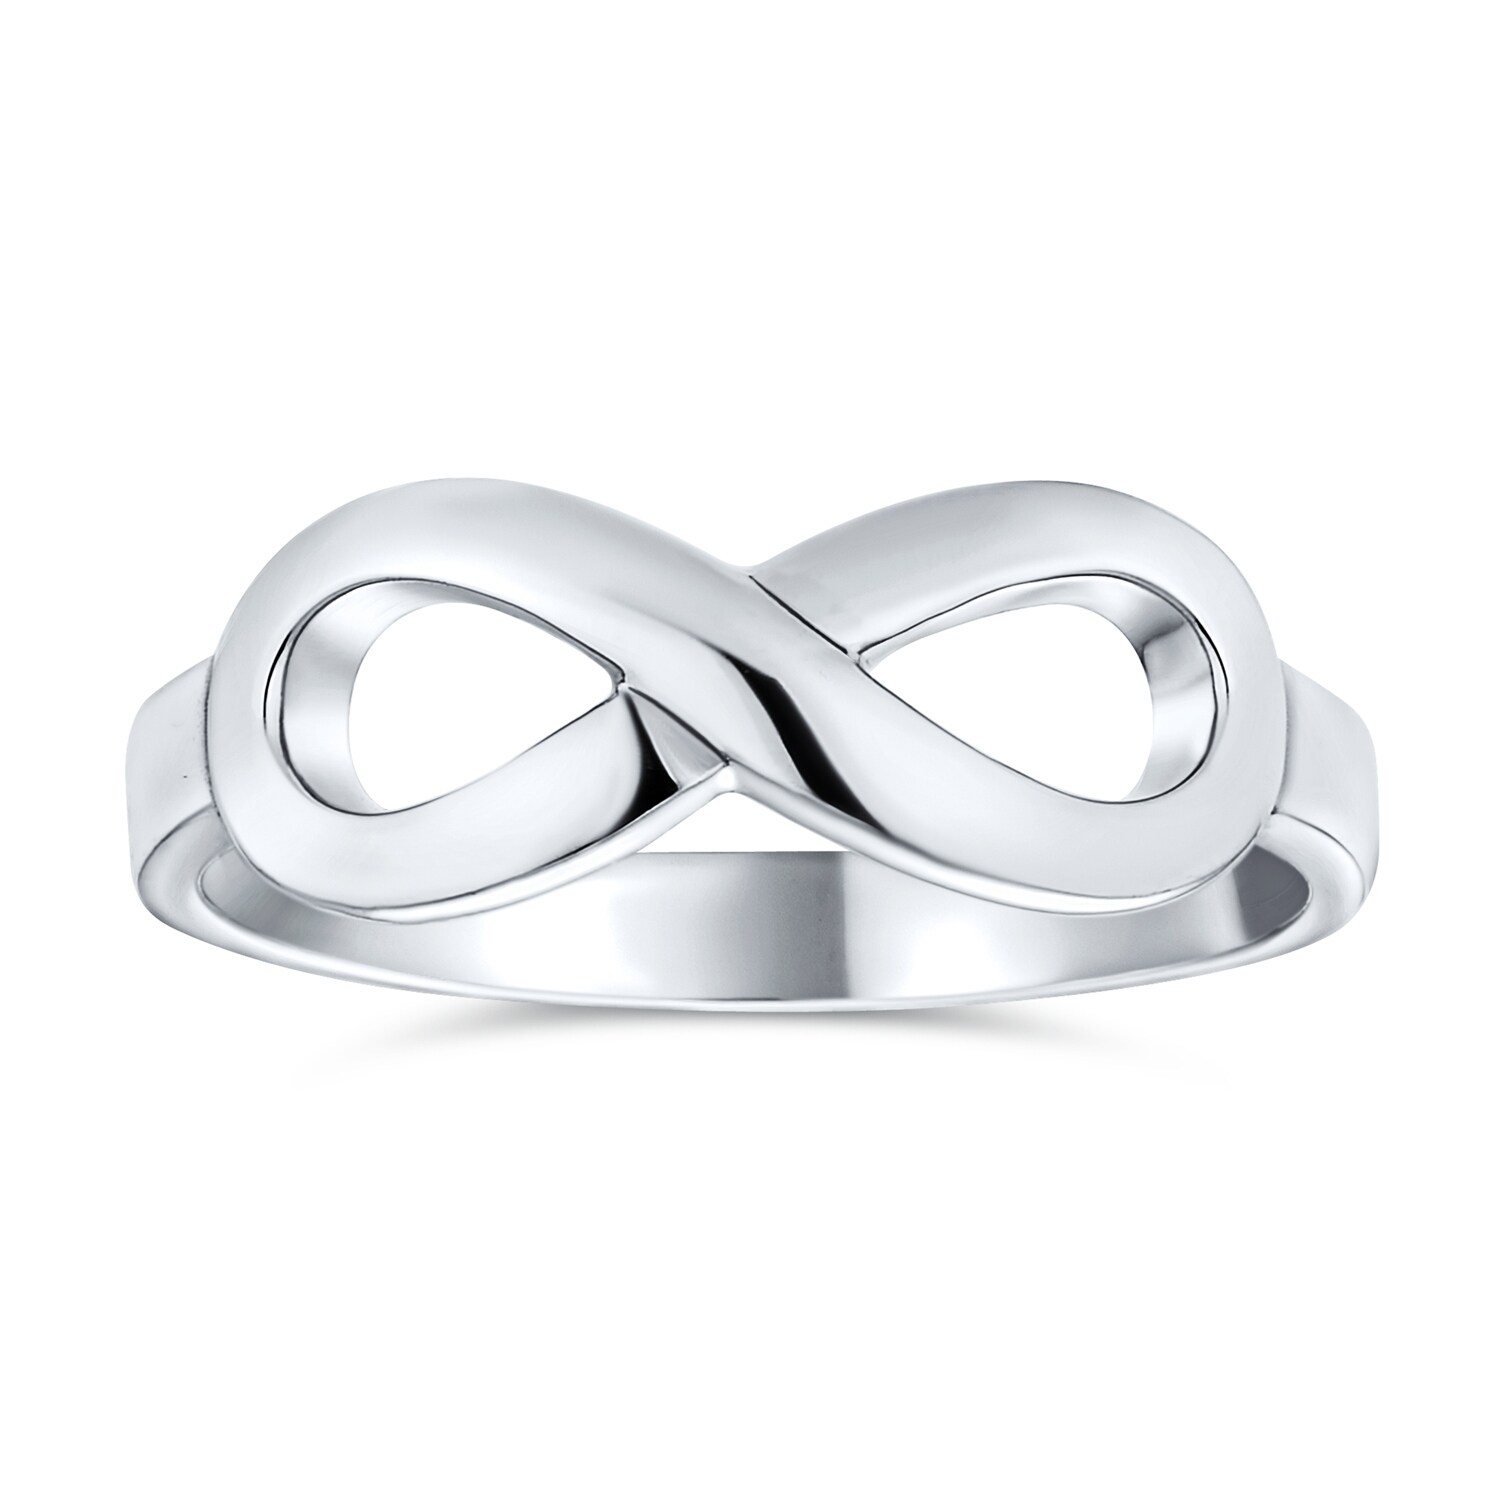 Best Friends BFF Love Knot Infinity Band Ring 925 Sterling Silver